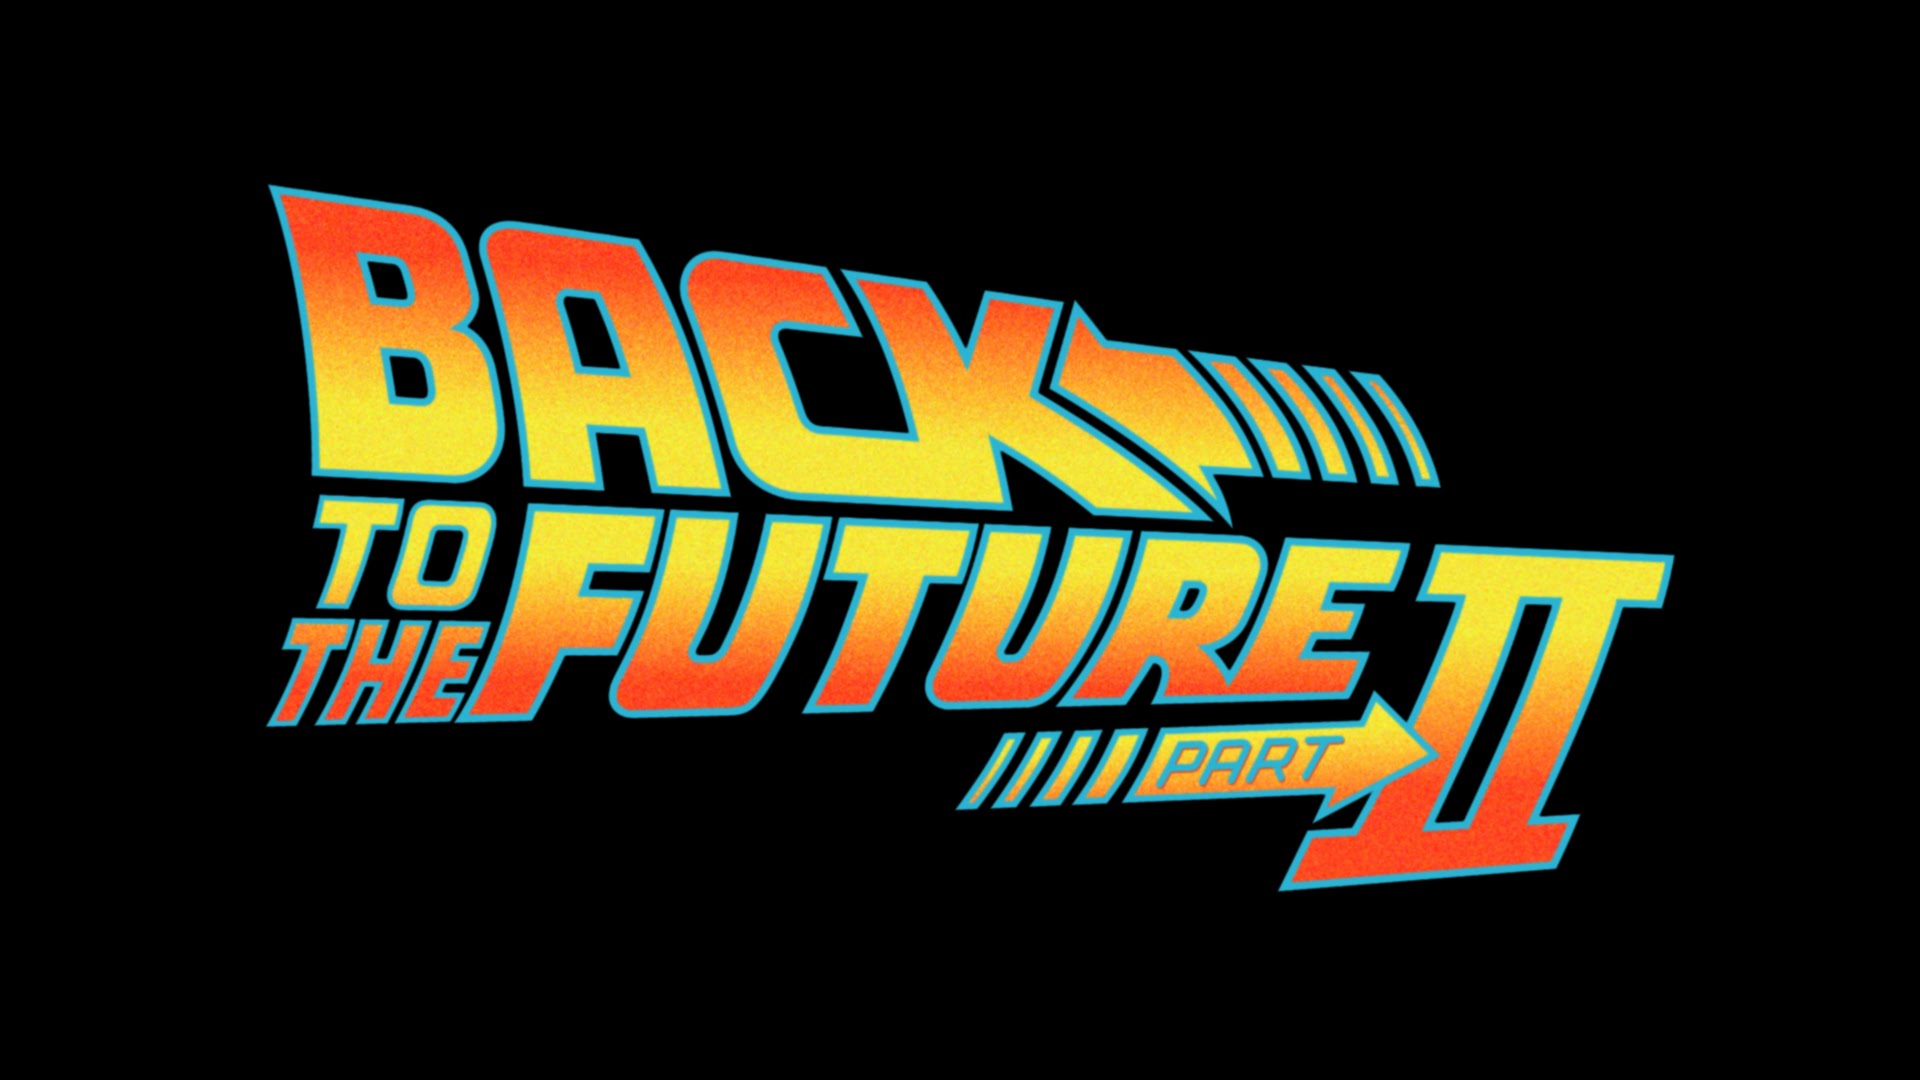 Back To The Future Part II #8